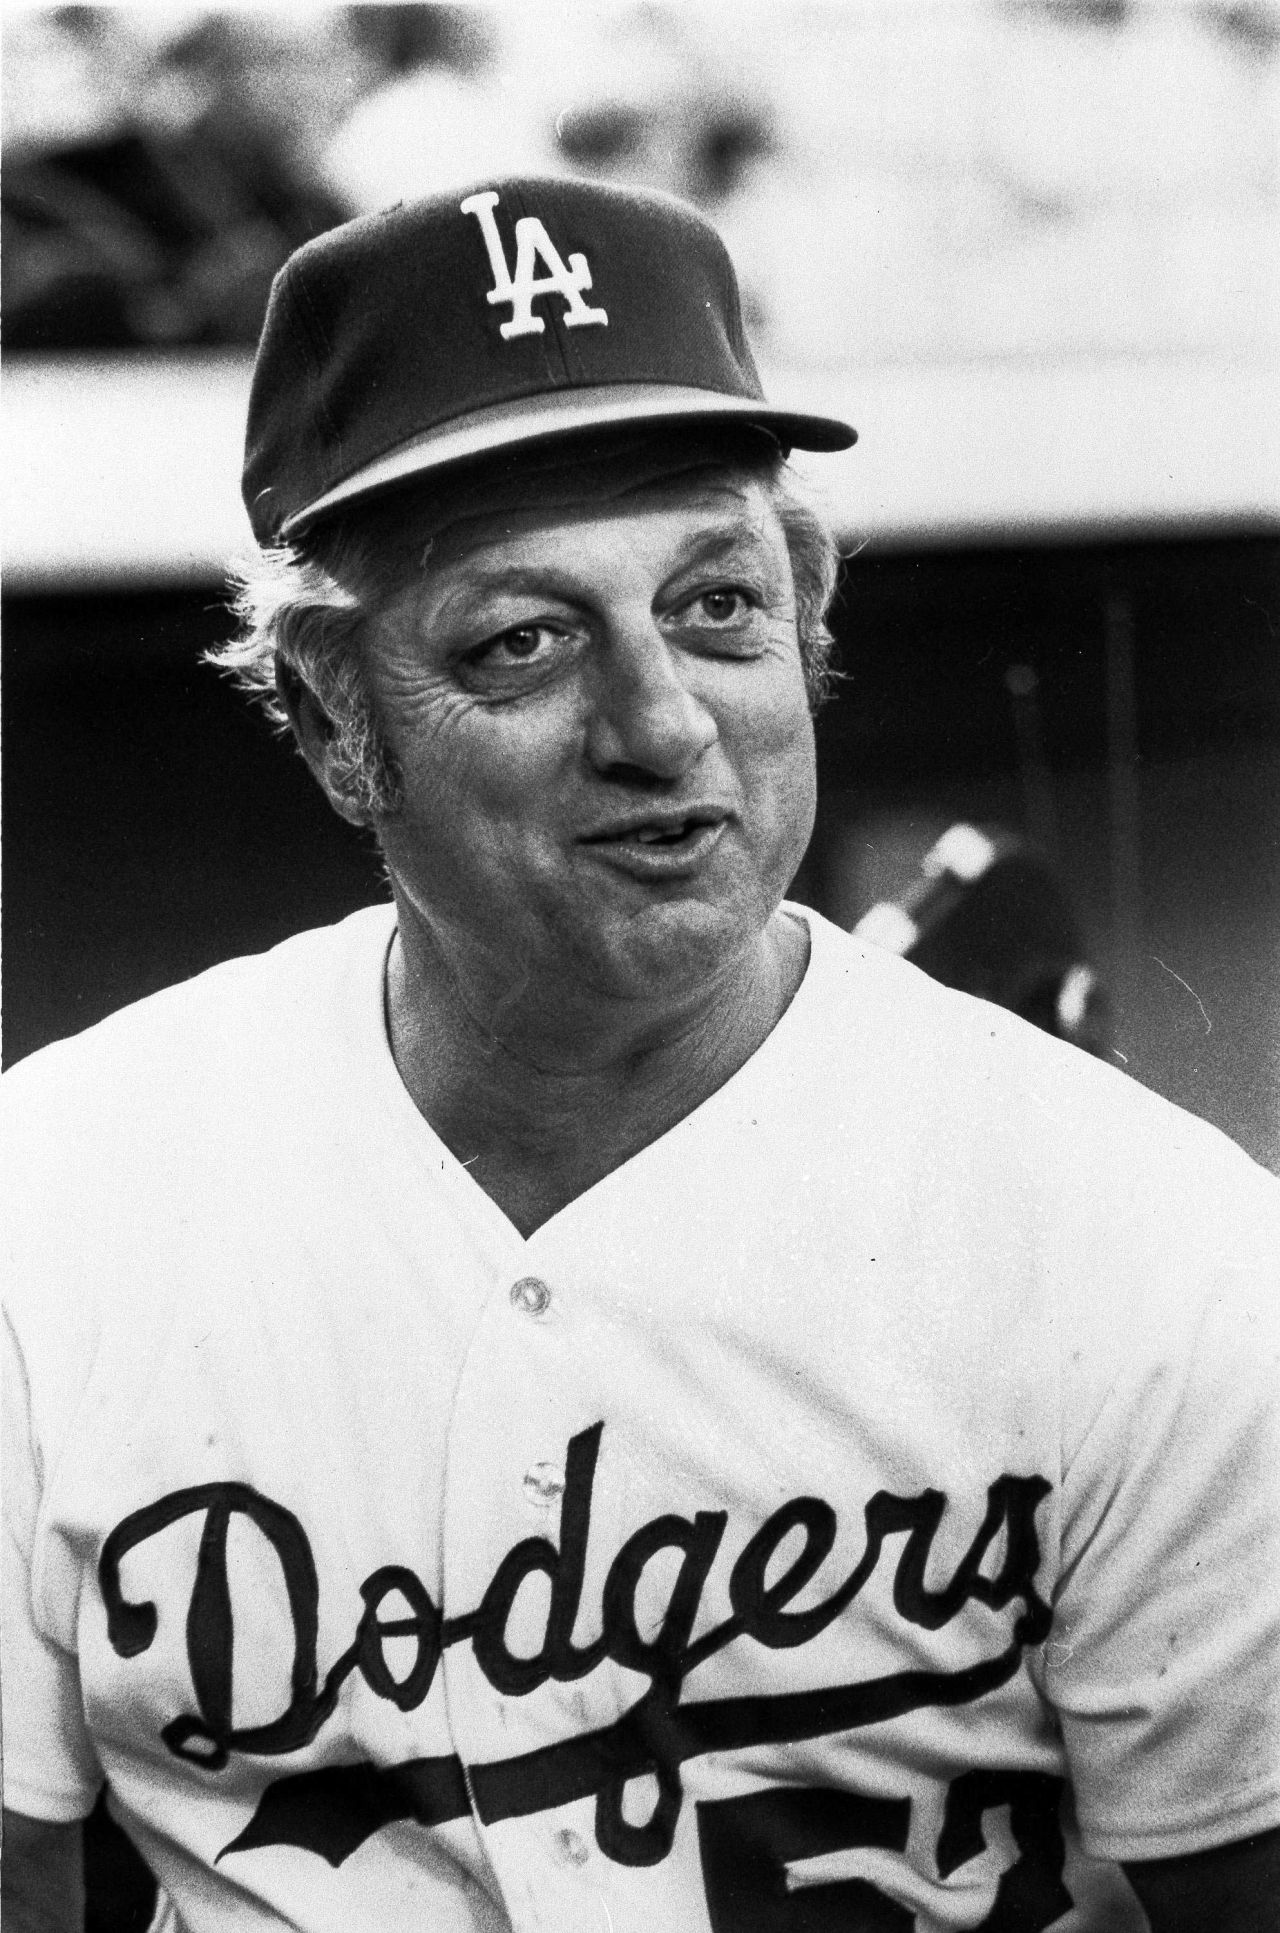 Lasorda in 1975. He managed the Dodgers from 1976-1996 and won two World Series. He was the first National League manager to win two pennants in his first two seasons.